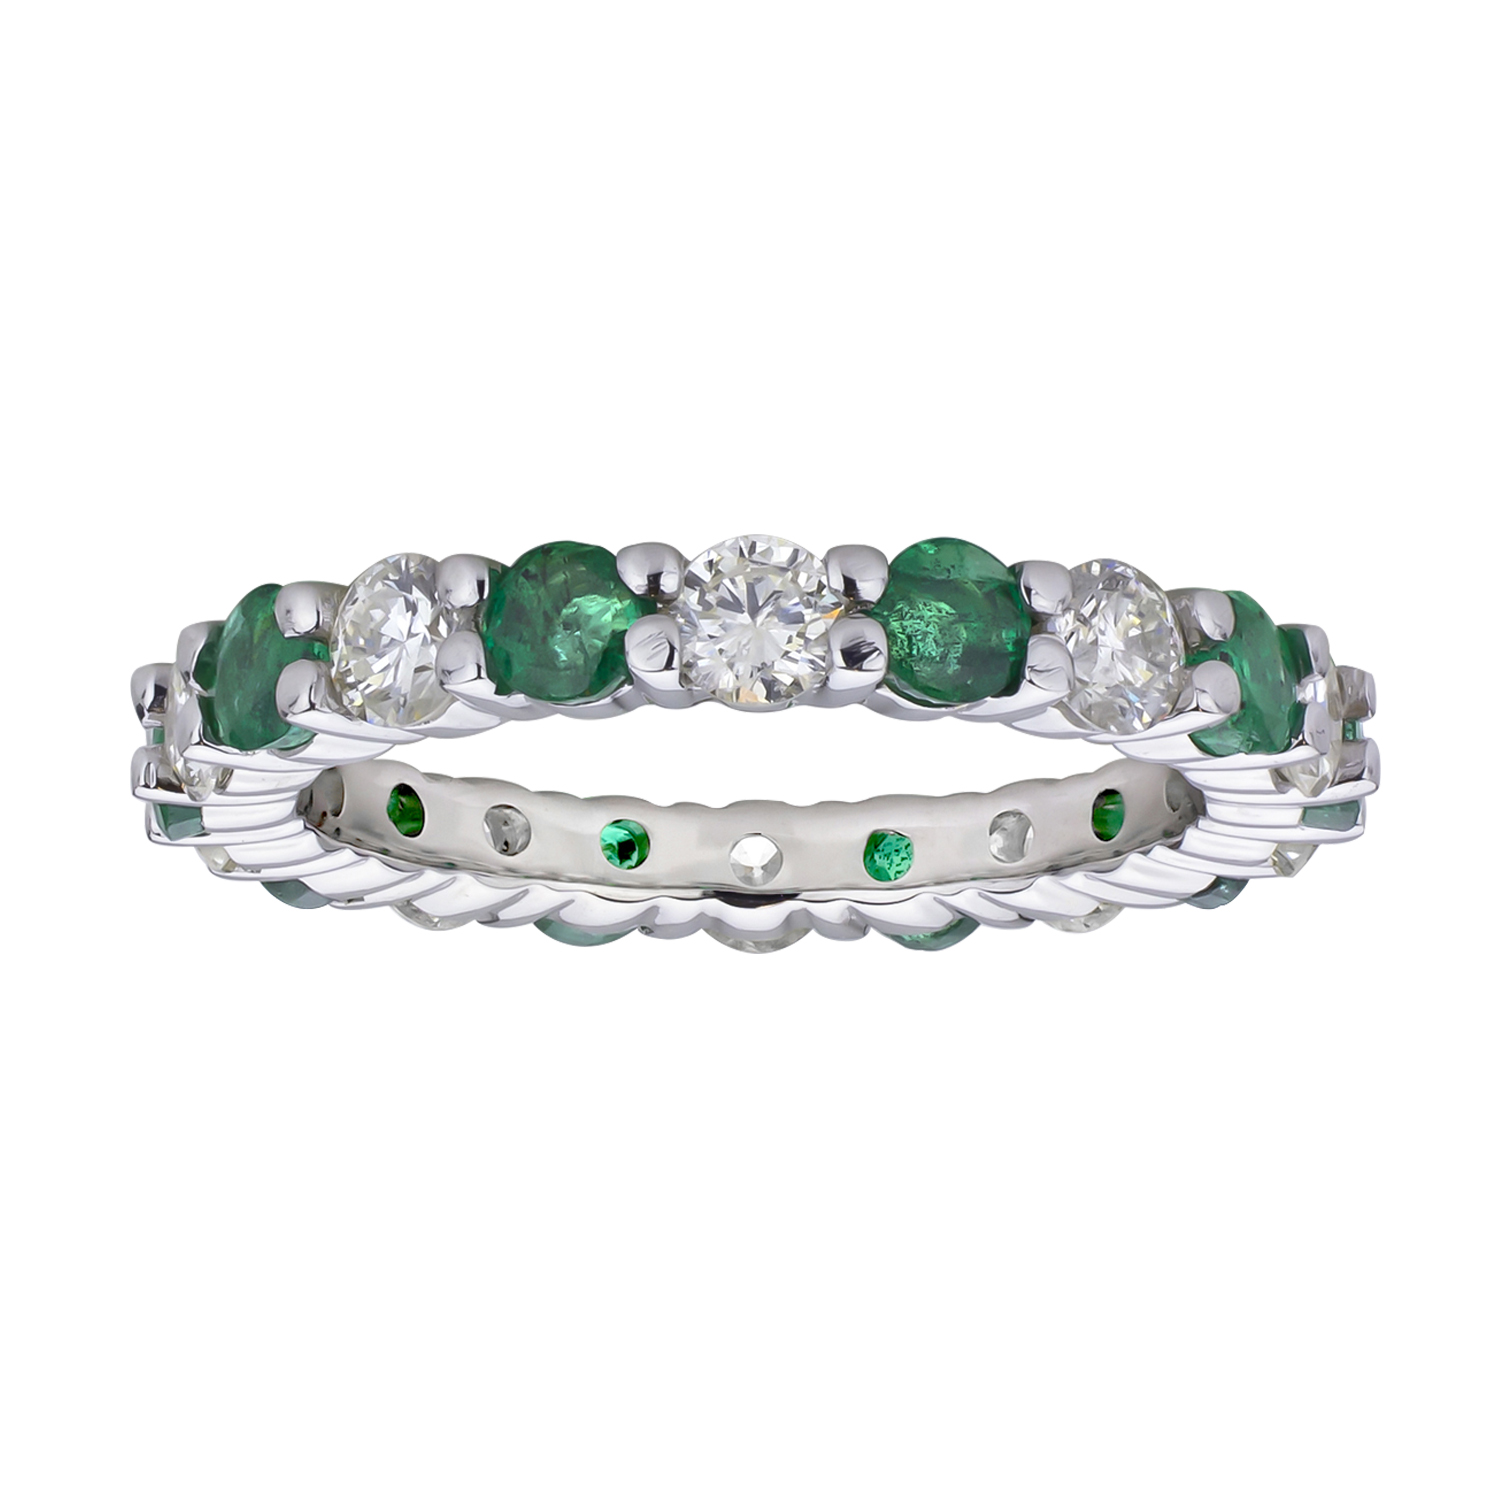 View 2.00cttw Diamond and Emerald Eternity Band set in 14k Gold